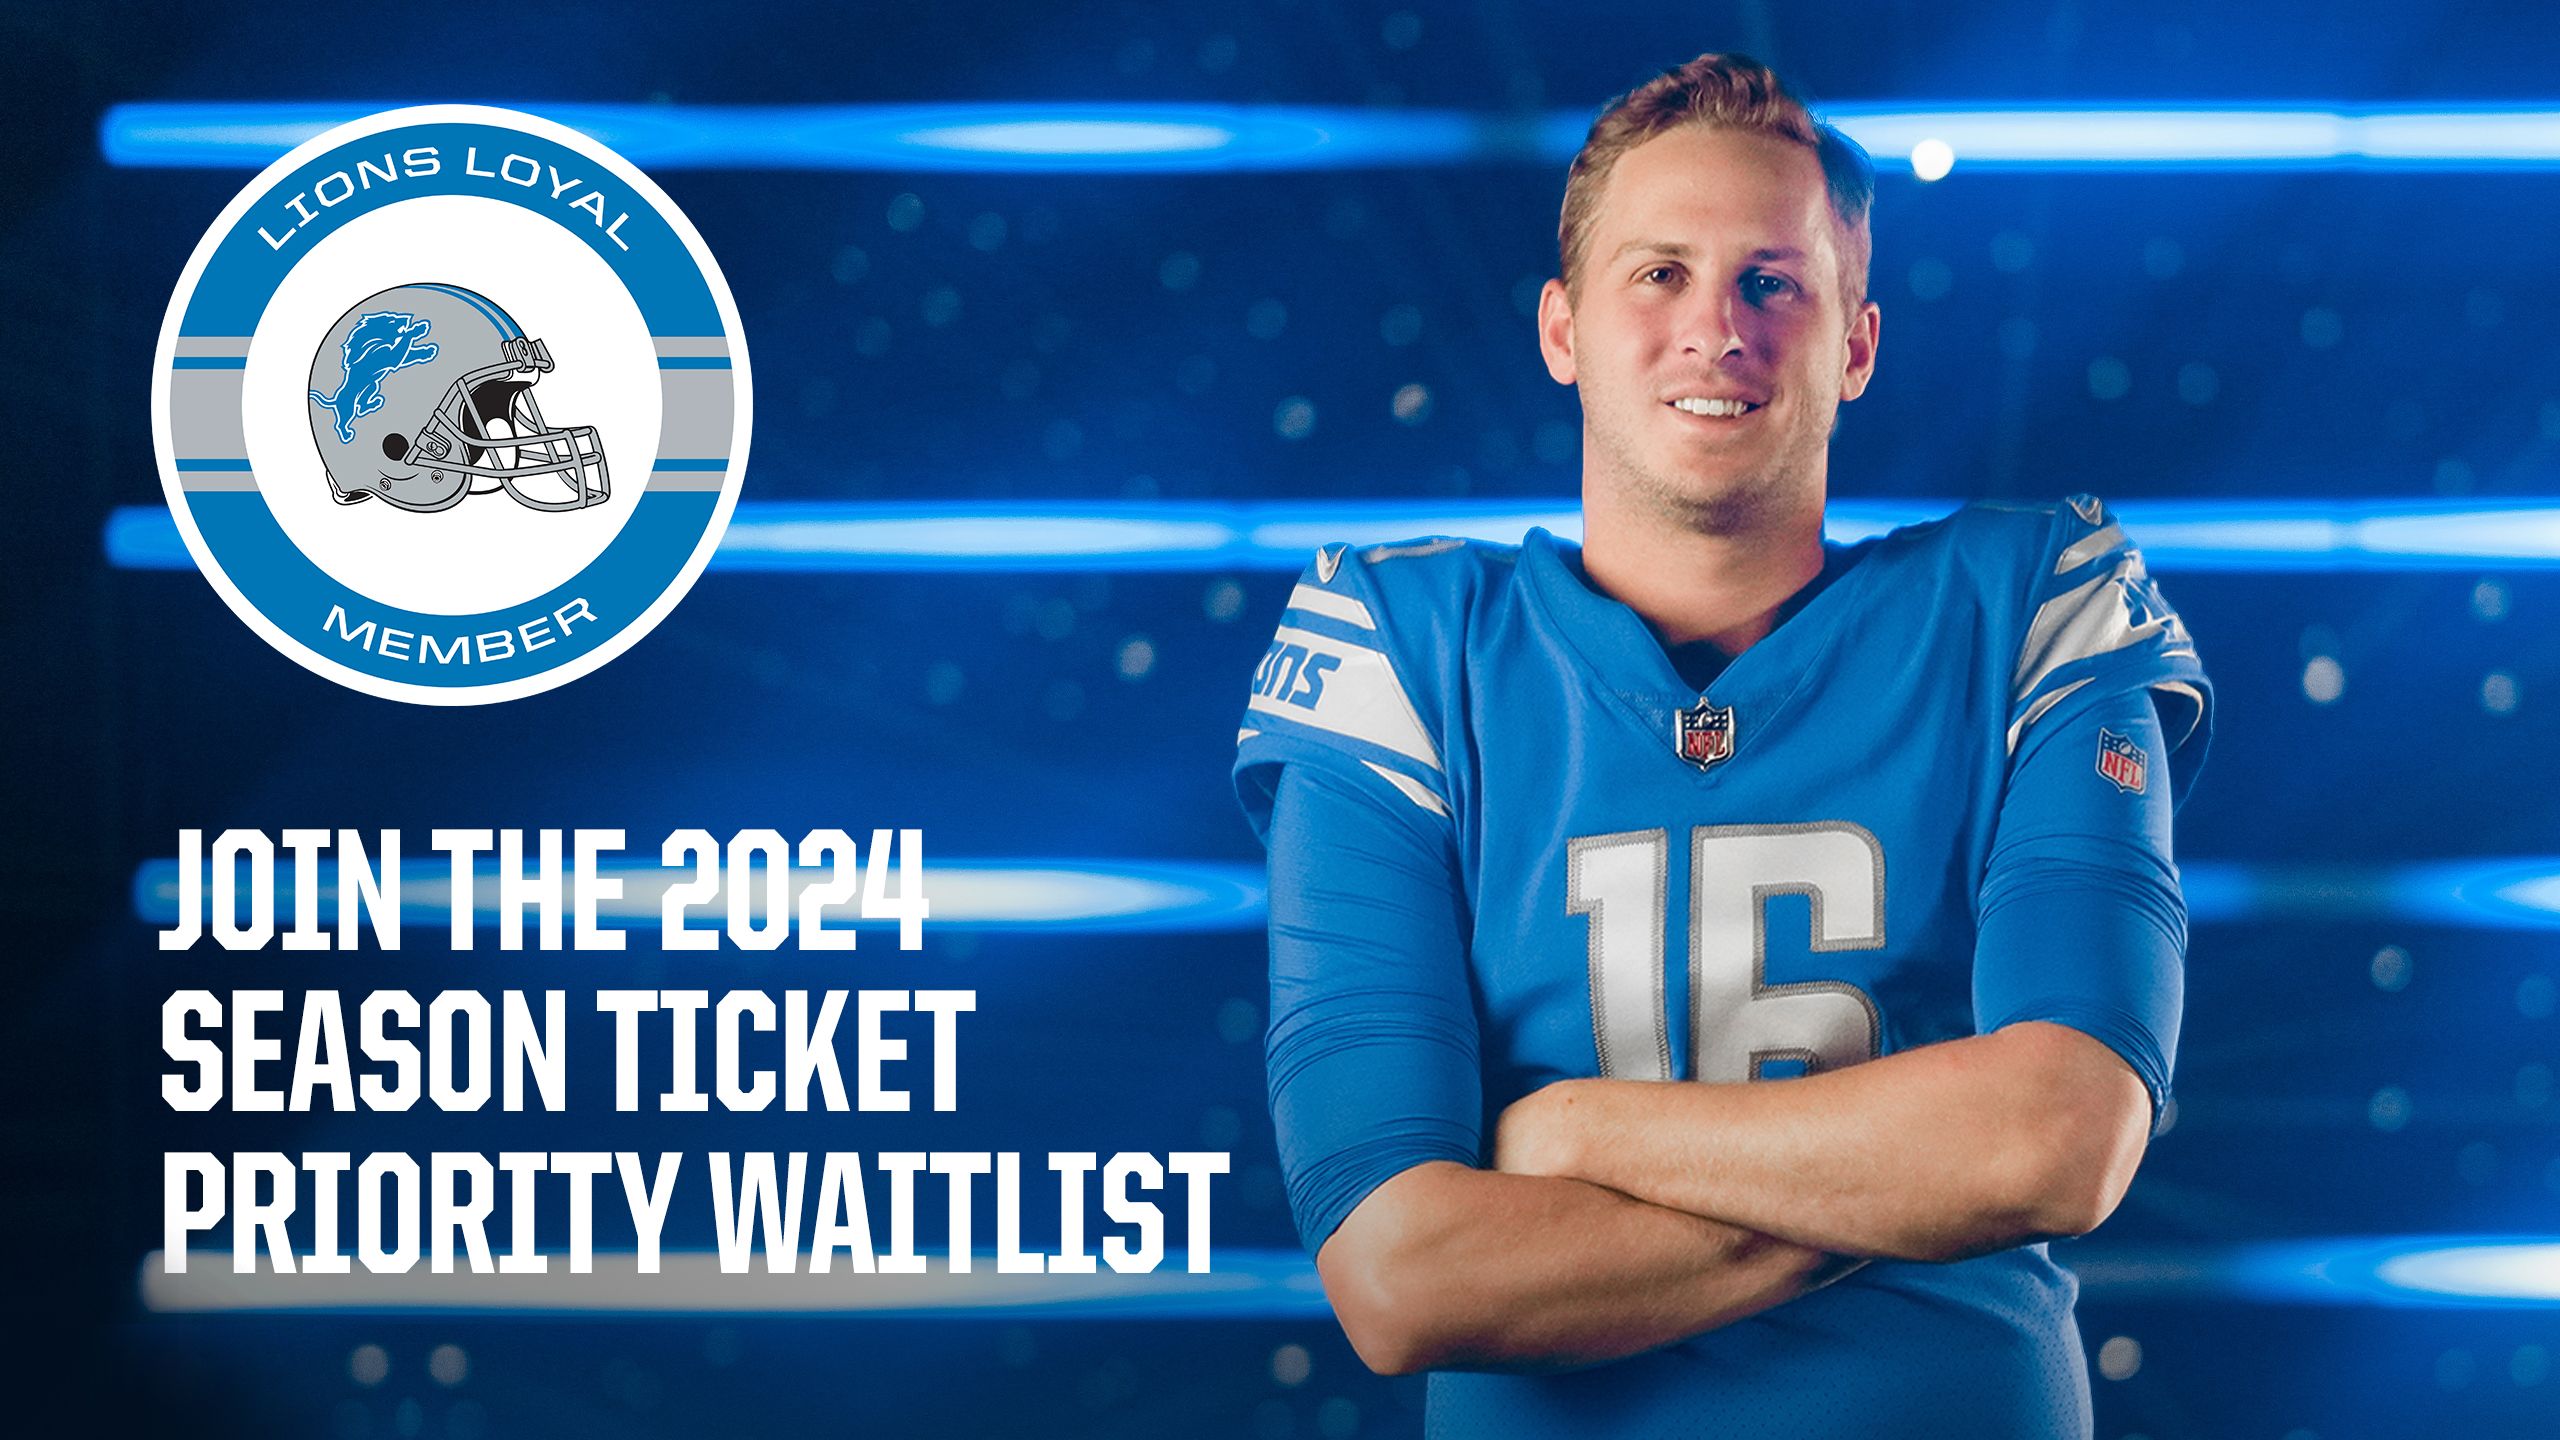 lions game tomorrow tickets